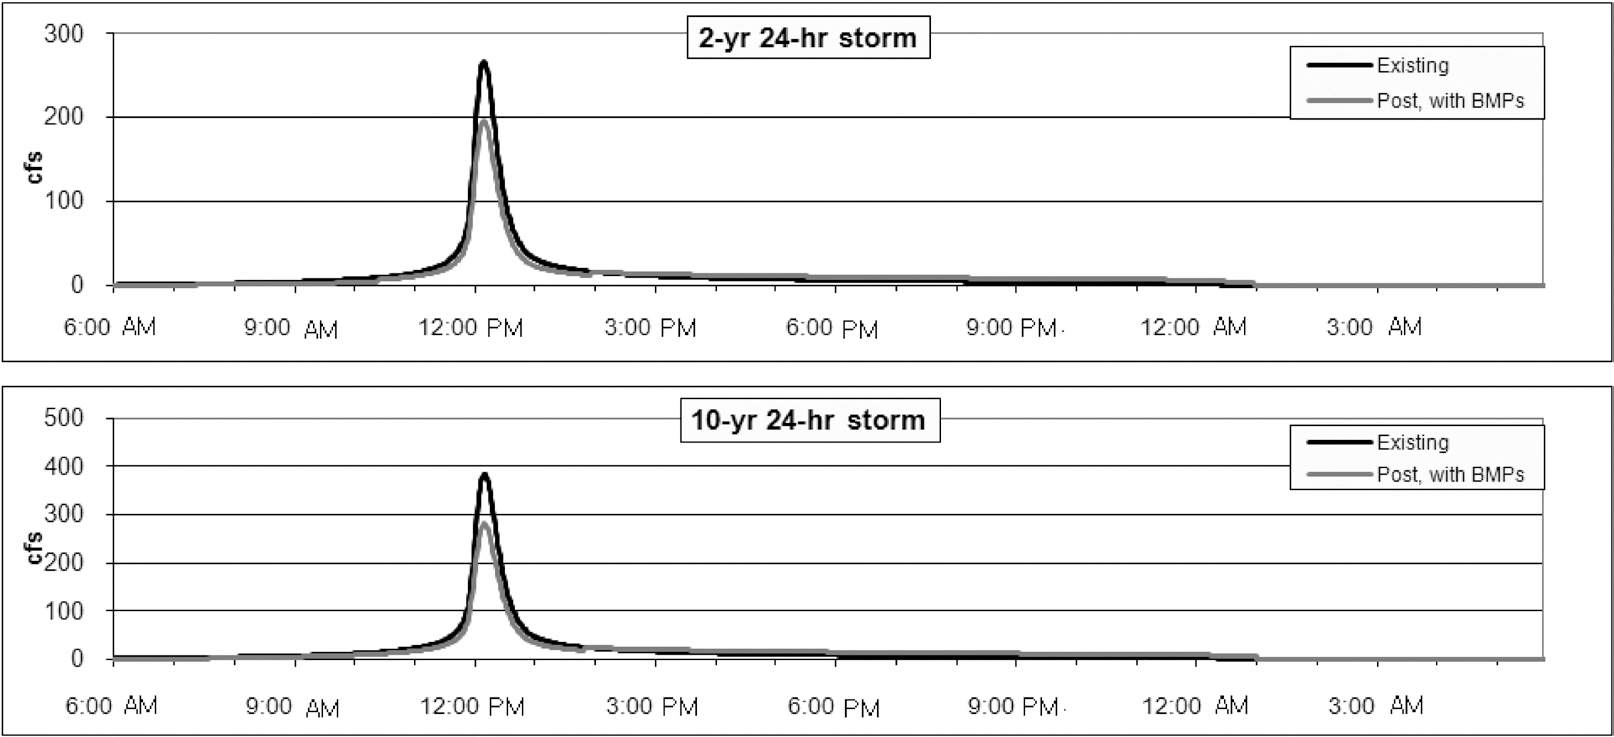 Hydrographs for 2-year and 10-year 24-hour storm events for the current and LID system land uses.